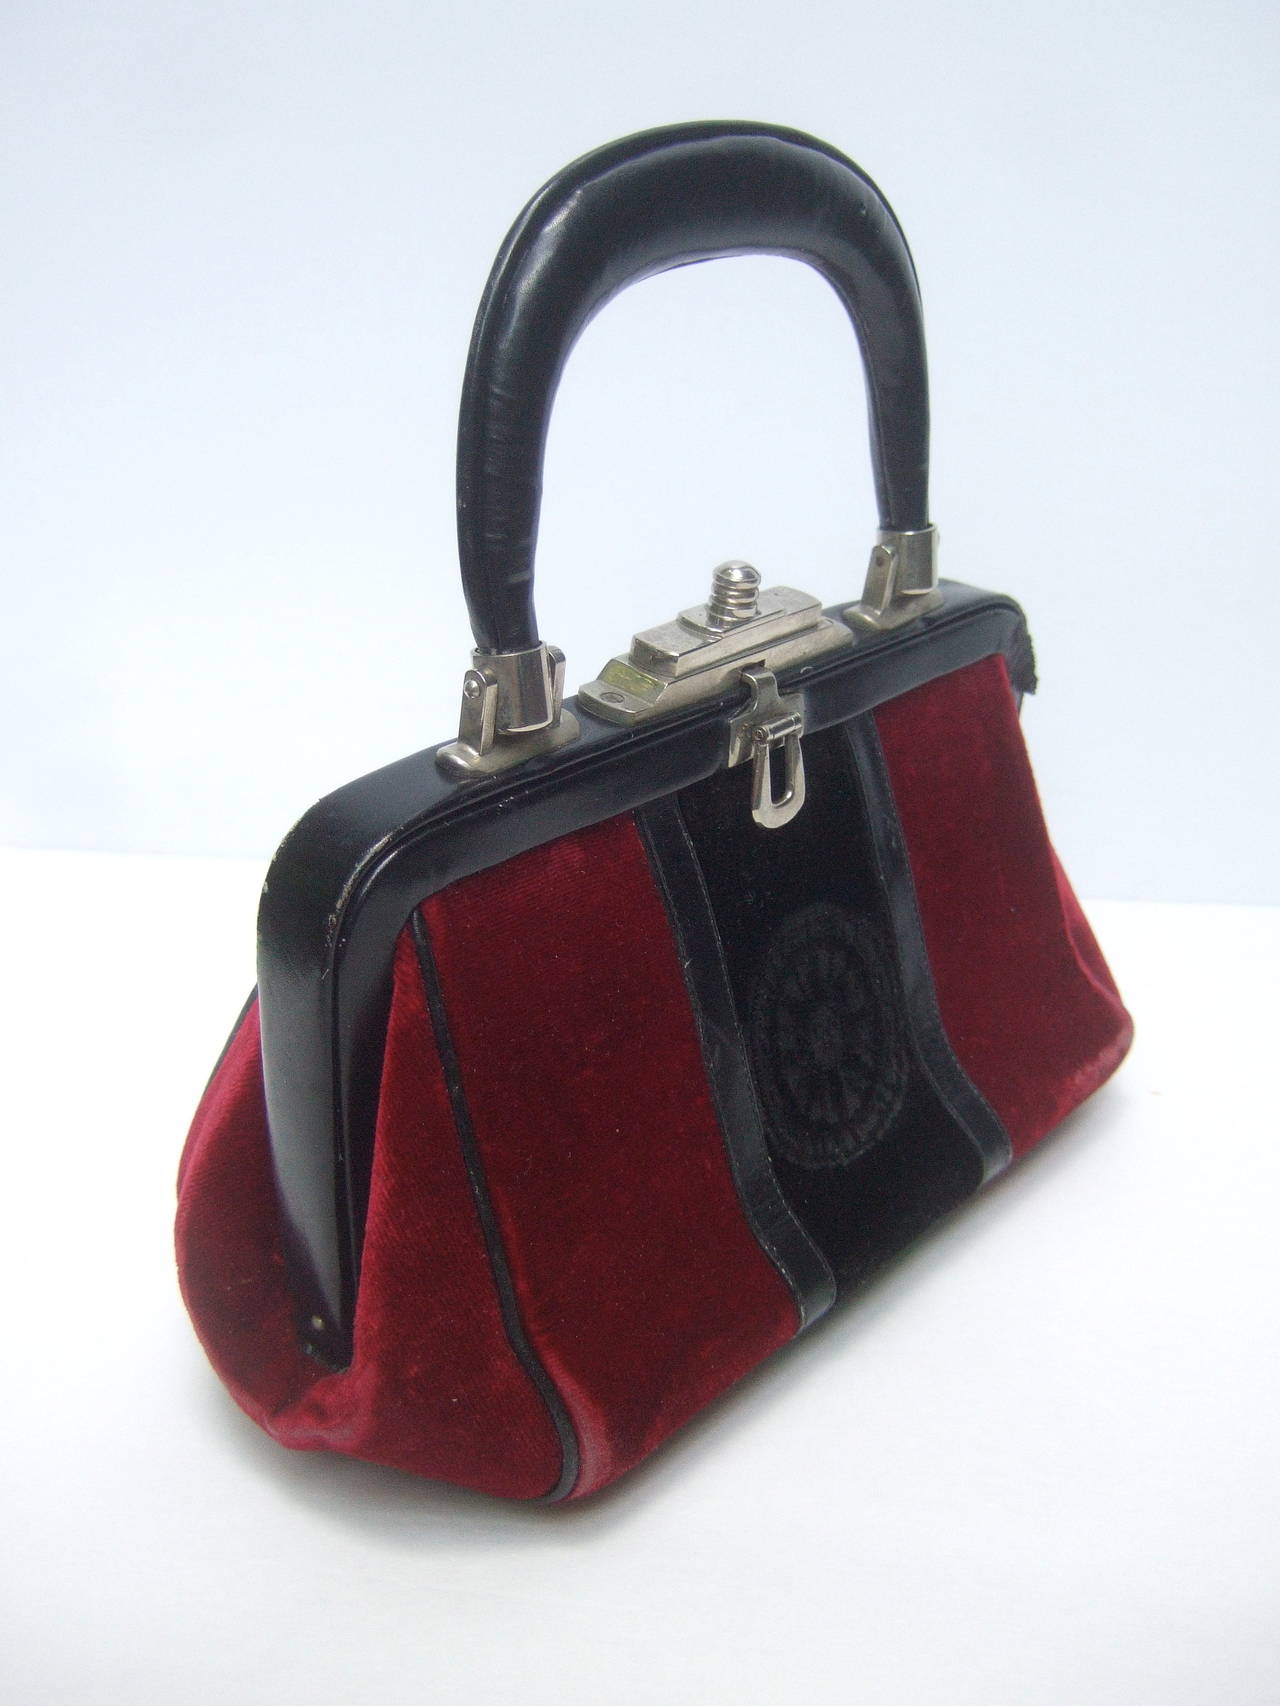 Roberta di Camerino Burgundy red & black velvet leather handbag c 1970
The chic Italian handbag is covered with dark red velvet with
a center black cut velvet panel with a radiating sun symbol

The clasp frame is black leather with chrome metal